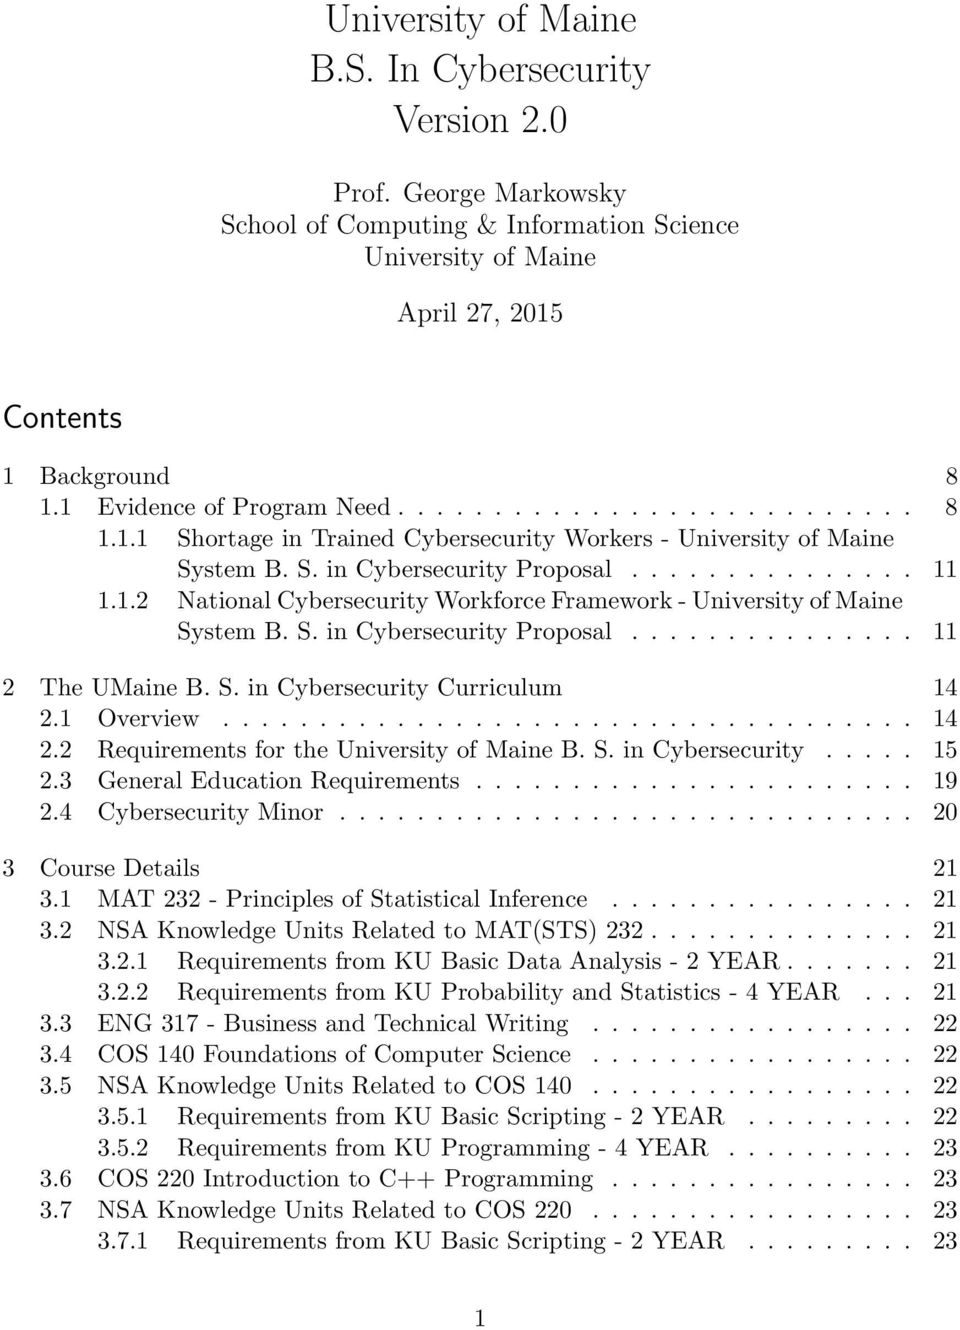 S. in Cybersecurity Proposal............... 11 2 The UMaine B. S. in Cybersecurity Curriculum 14 2.1 Overview.................................... 14 2.2 Requirements for the University of Maine B. S. in Cybersecurity..... 15 2.